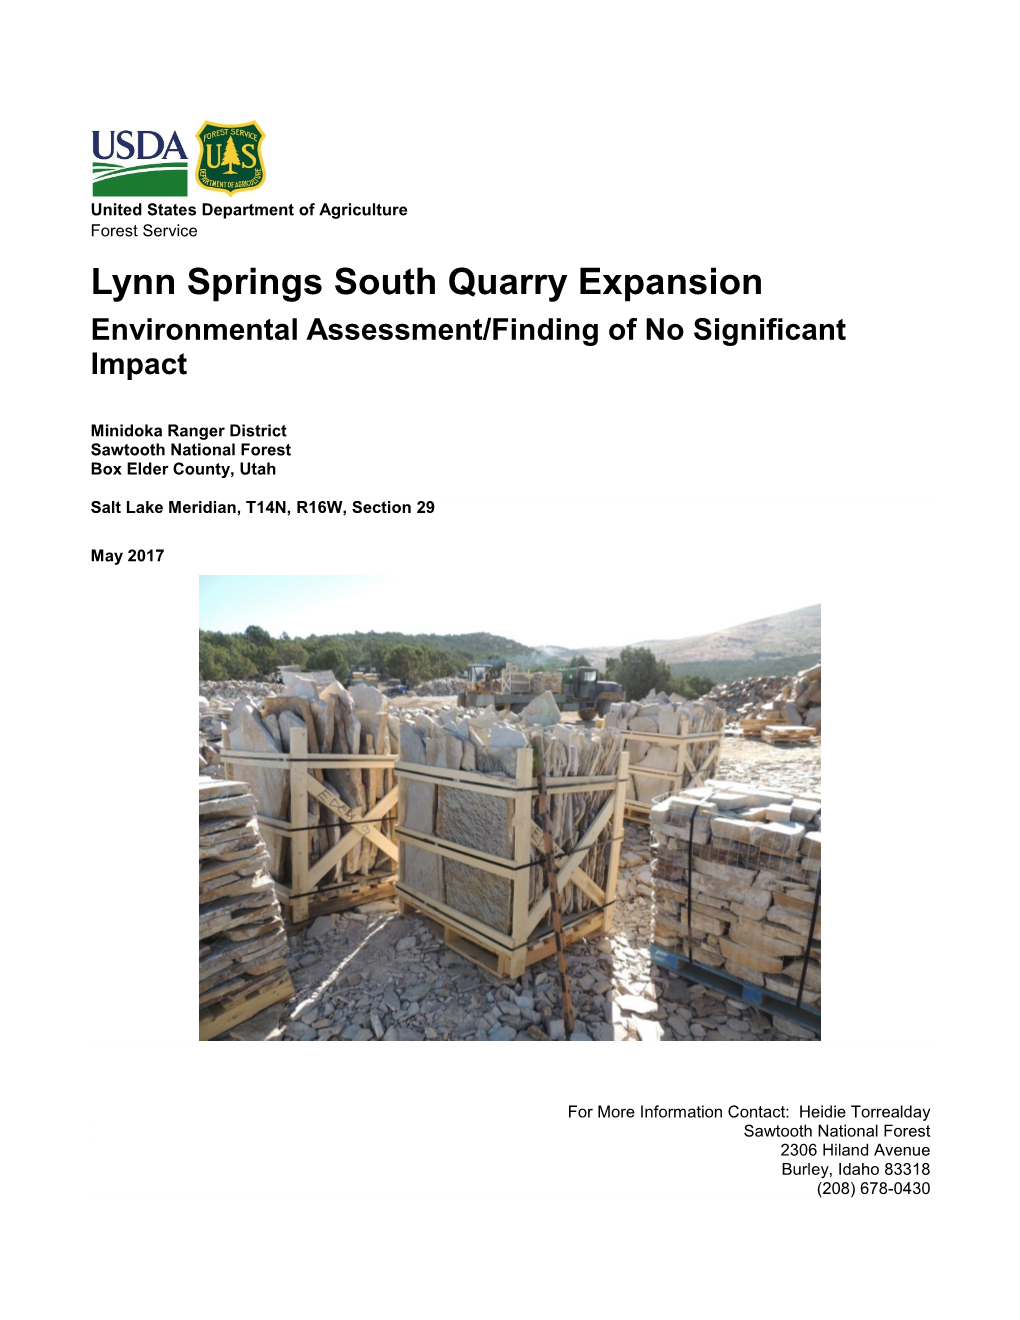 Lynn Springs South Quarry Expansion Environmental Assessment/Finding of No Significant Impact